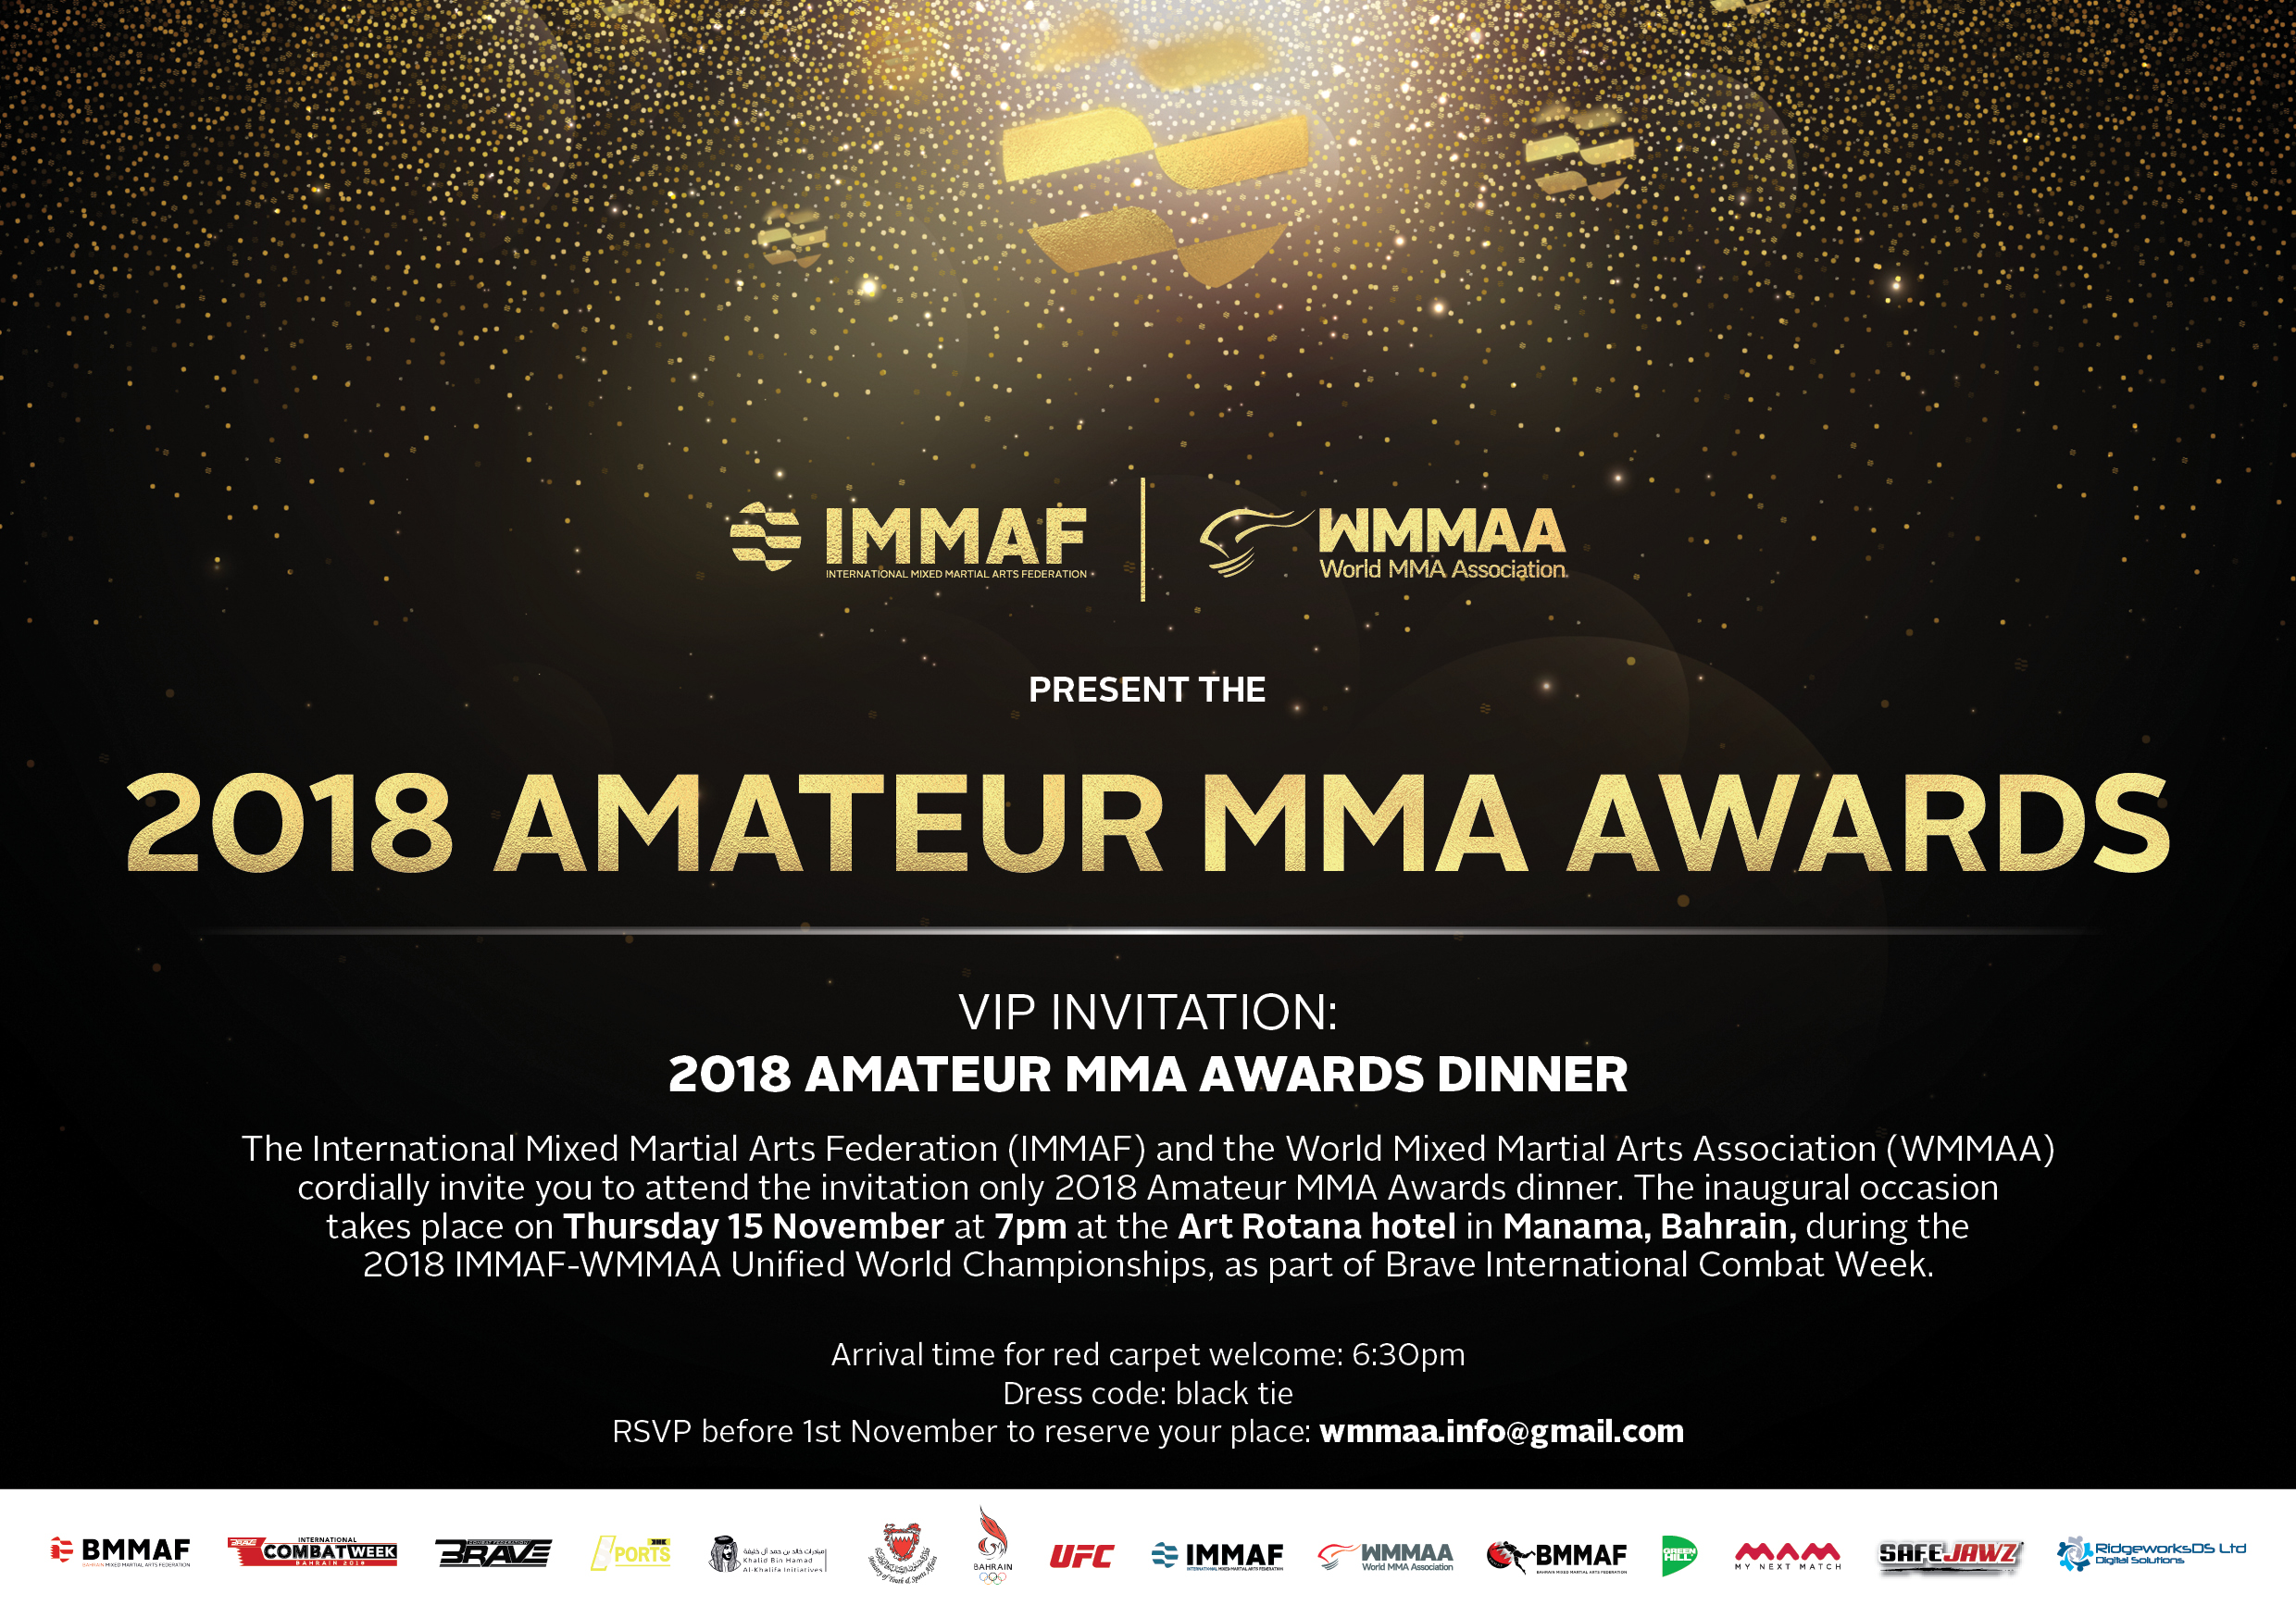 IMMAF-WMMAA Confirm Shortlist Nominees for 'Changing Lives Through MMA' Award